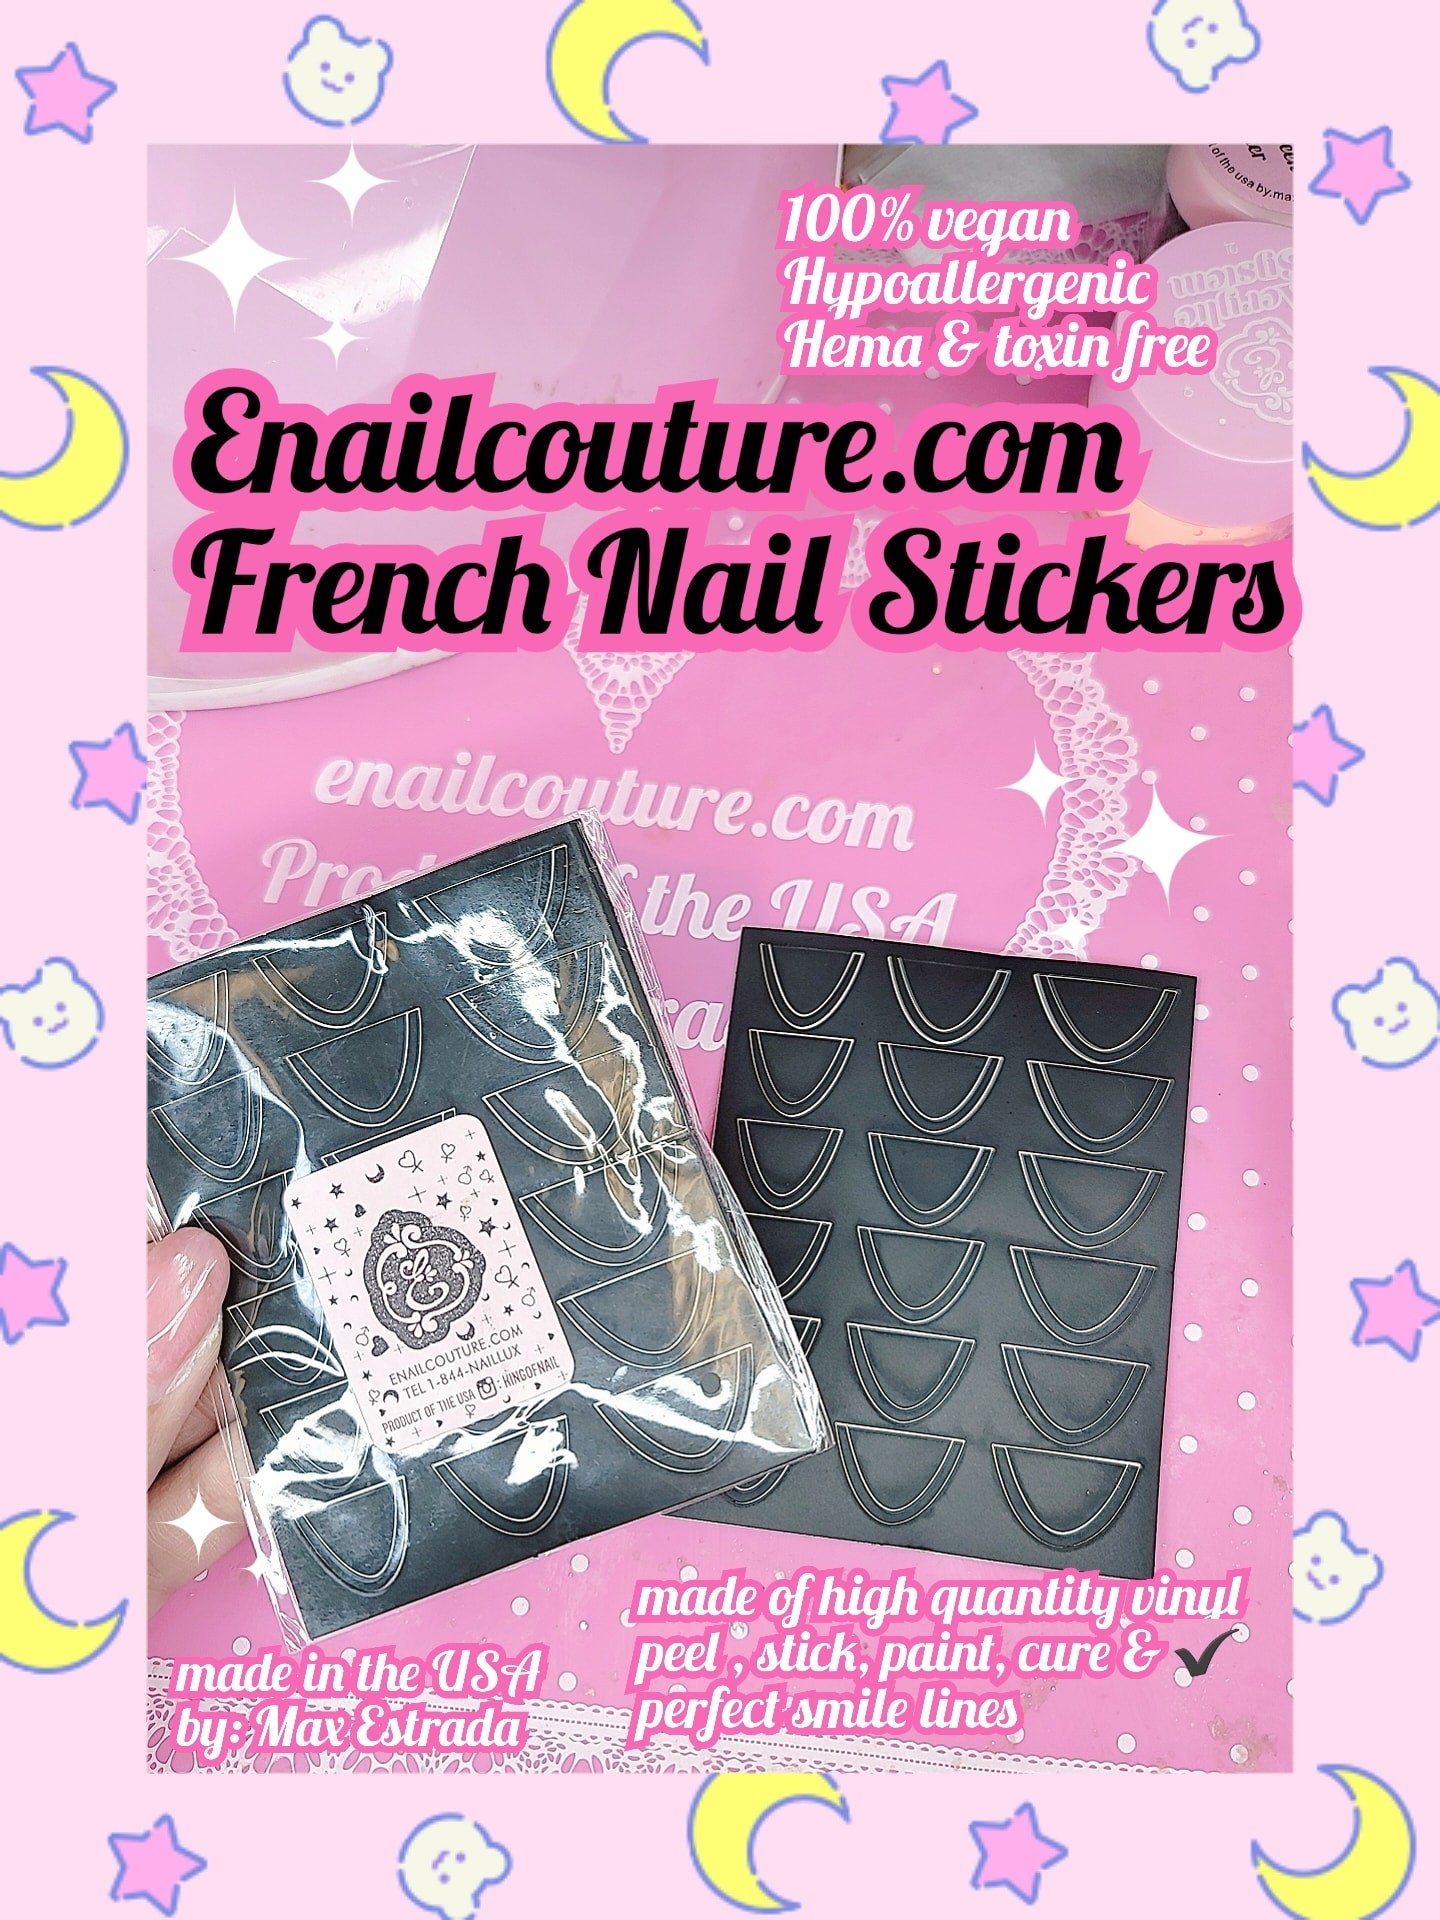 French nail stickers (French Tip Nail Stickers Self-Adhesive French Tip Nail Guides French Manicure Strips French Tip Nail Tool Sheets)